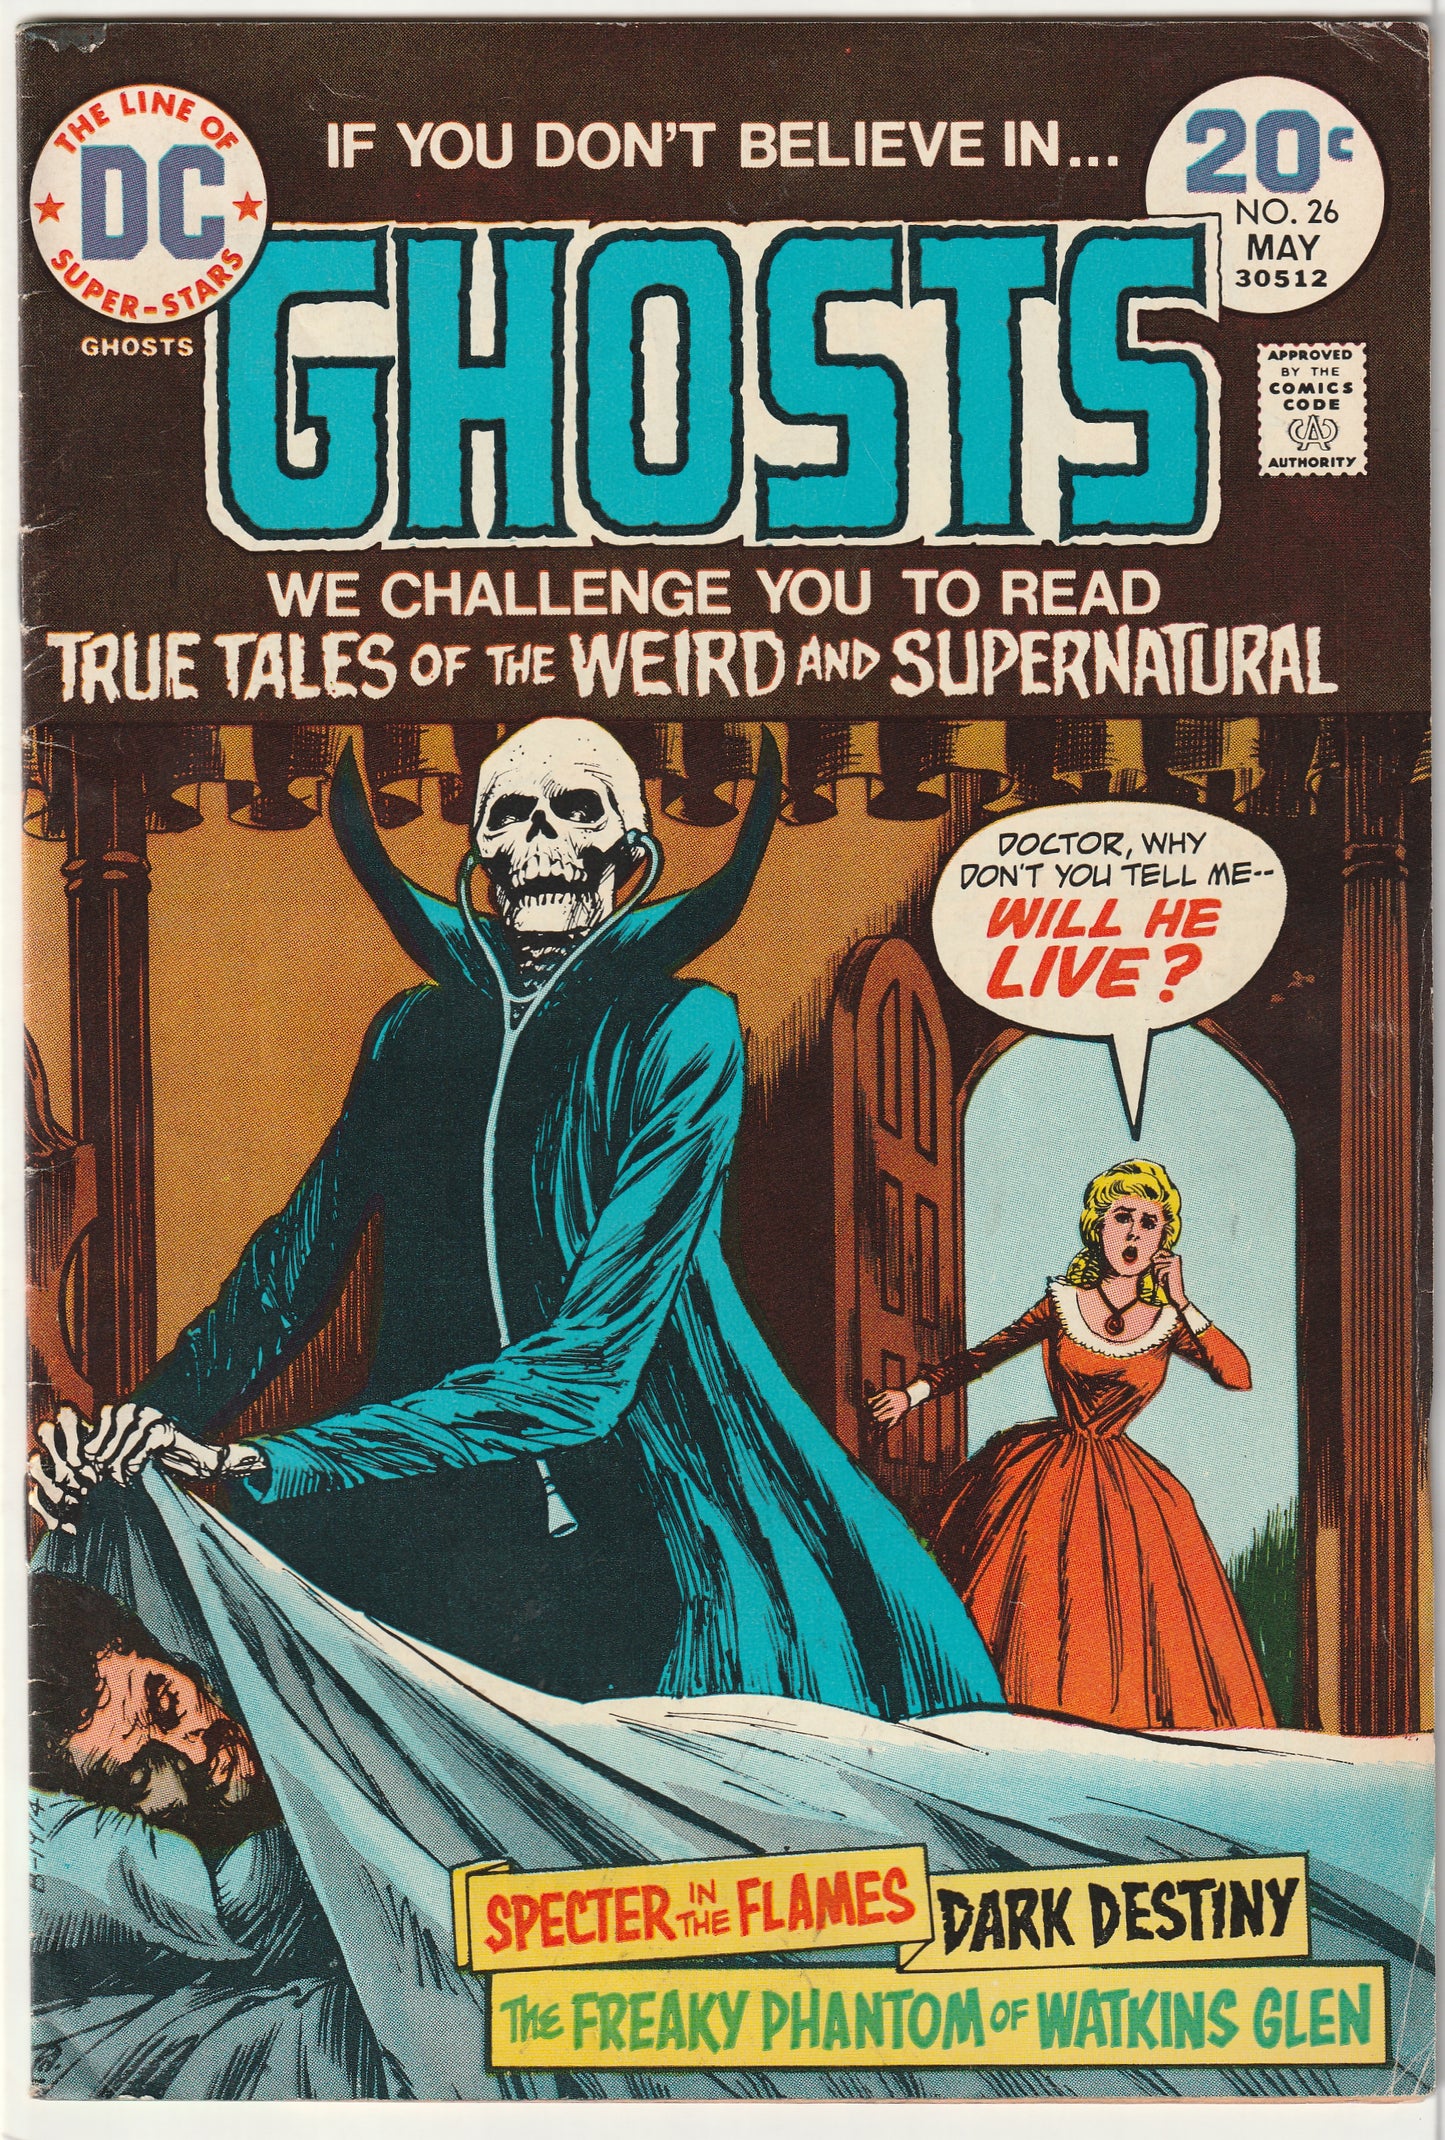 Ghosts #26 (1974)